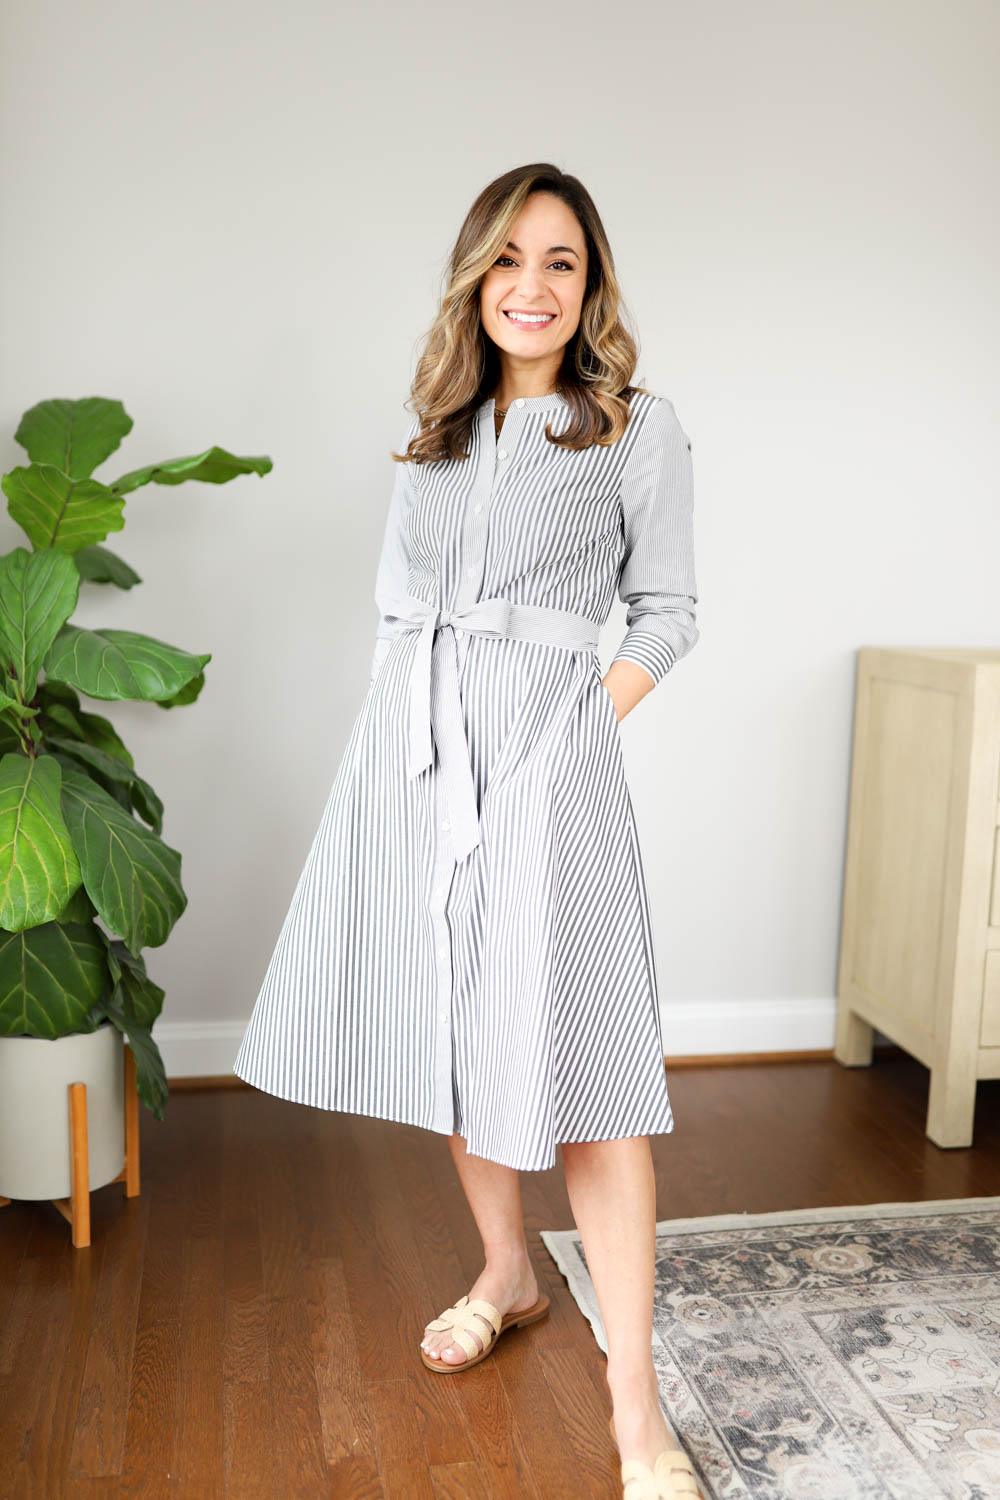 Spring travel outfits via pumps and push-ups blog | talbots outfits | beach dress | classic striped dress outfit | shirt dress outfit